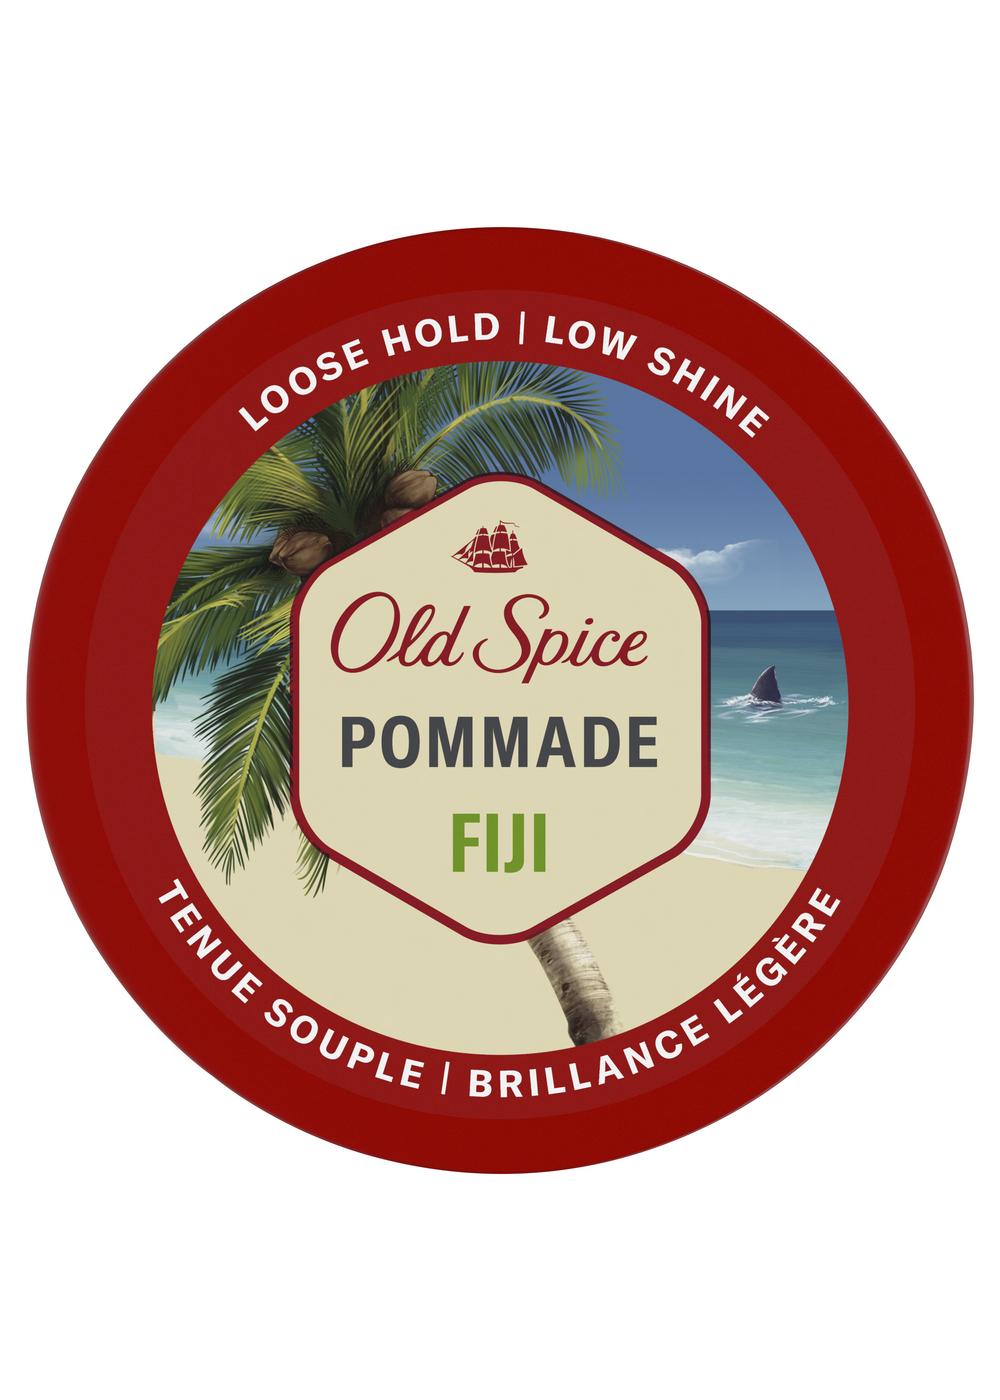 Old Spice Fiji Hair Styling Pomade for Men; image 1 of 9